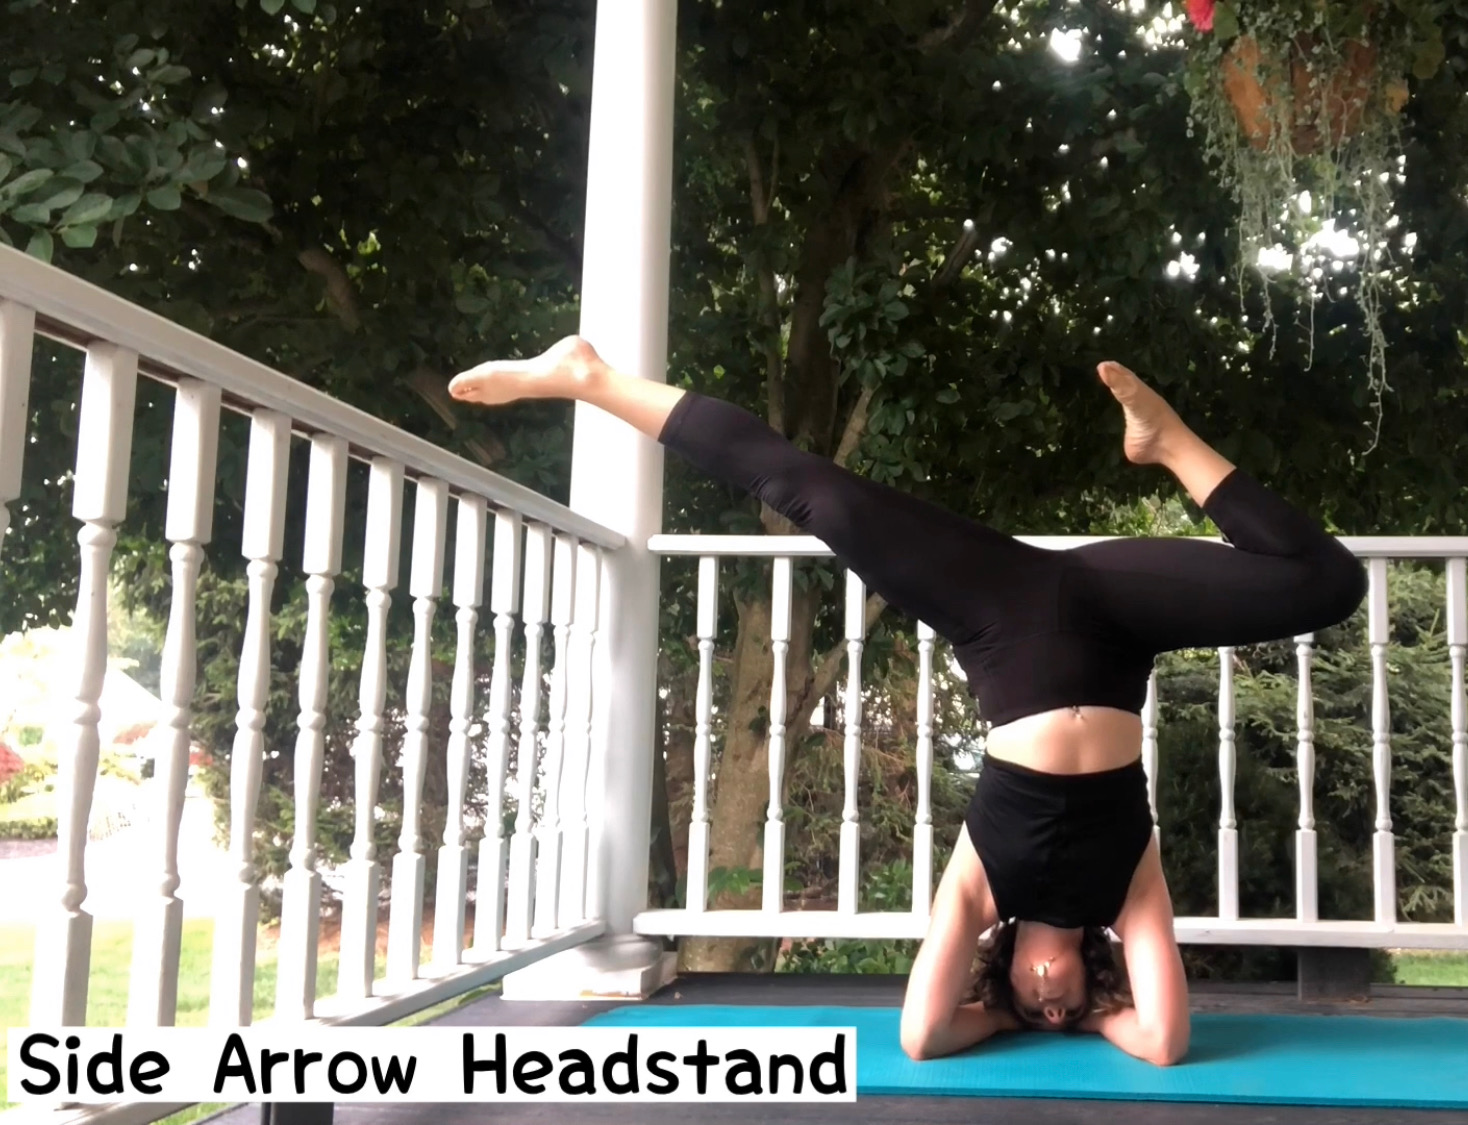 Headstand Poses 17 Different Headstand Variations To Keep Your Practice Fresh Brittany Schreiber 9152